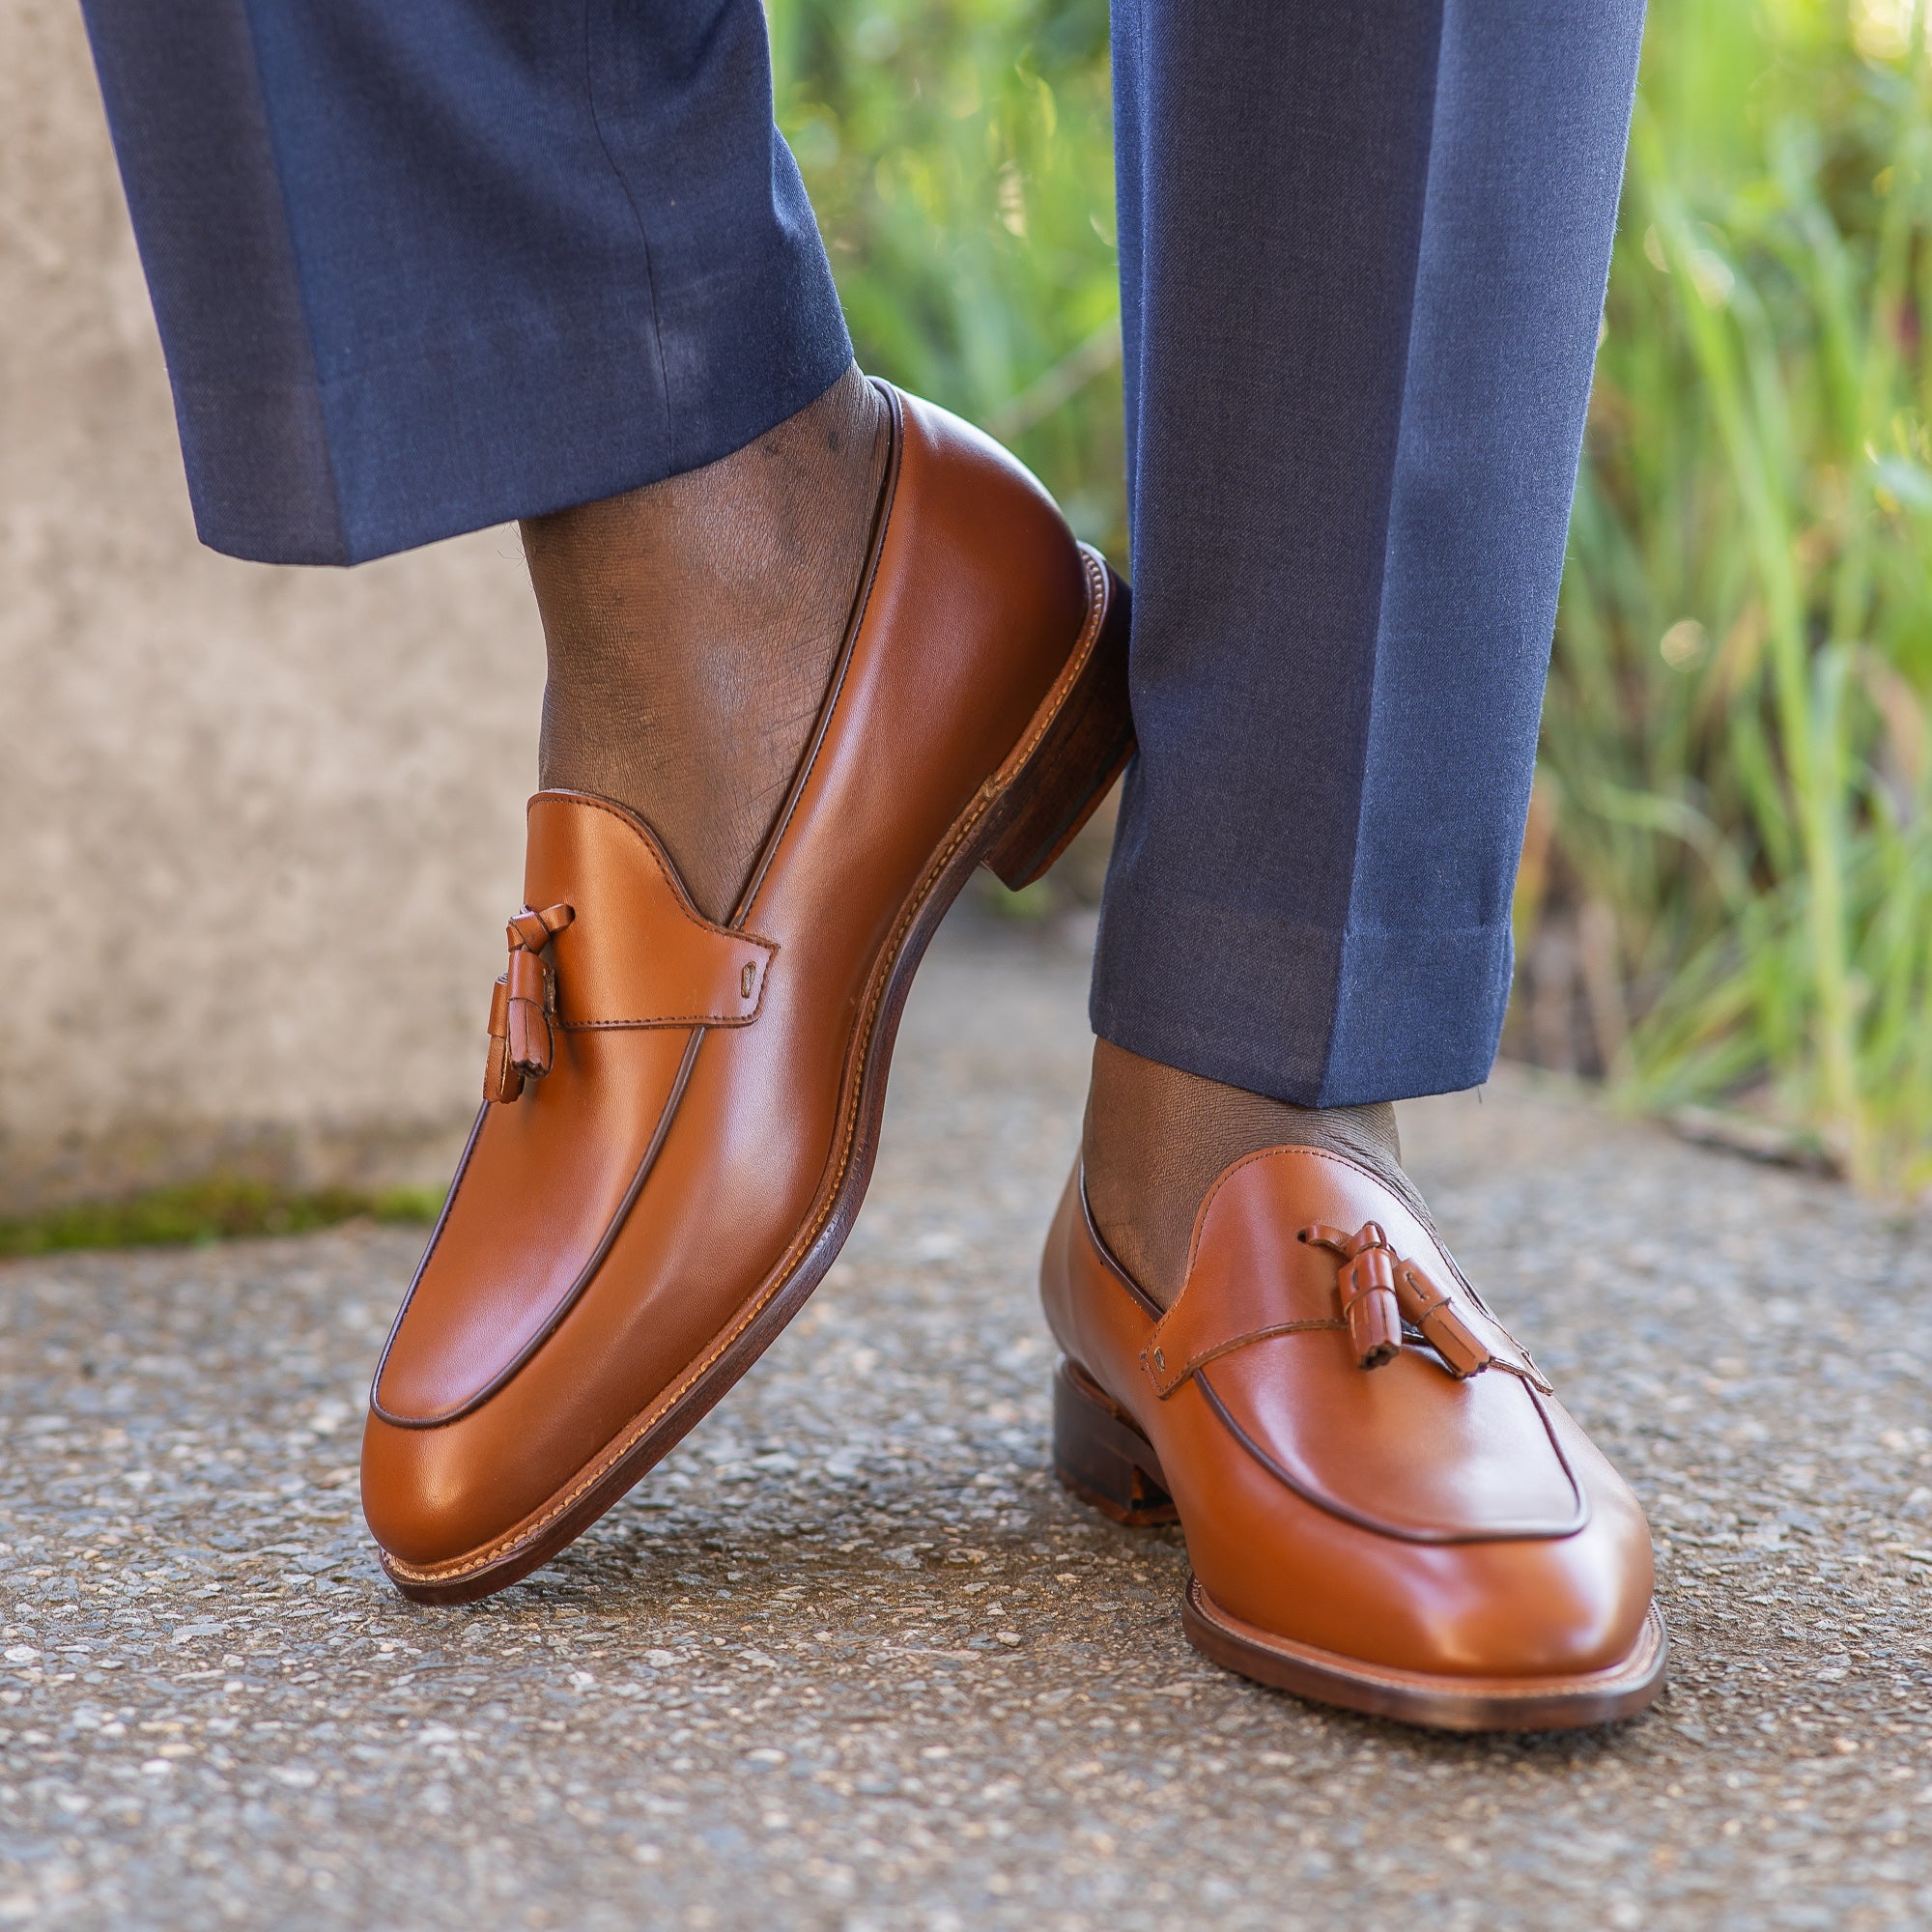 Tassel Loafers Paired With Jeans For Smart Casual Outfit.